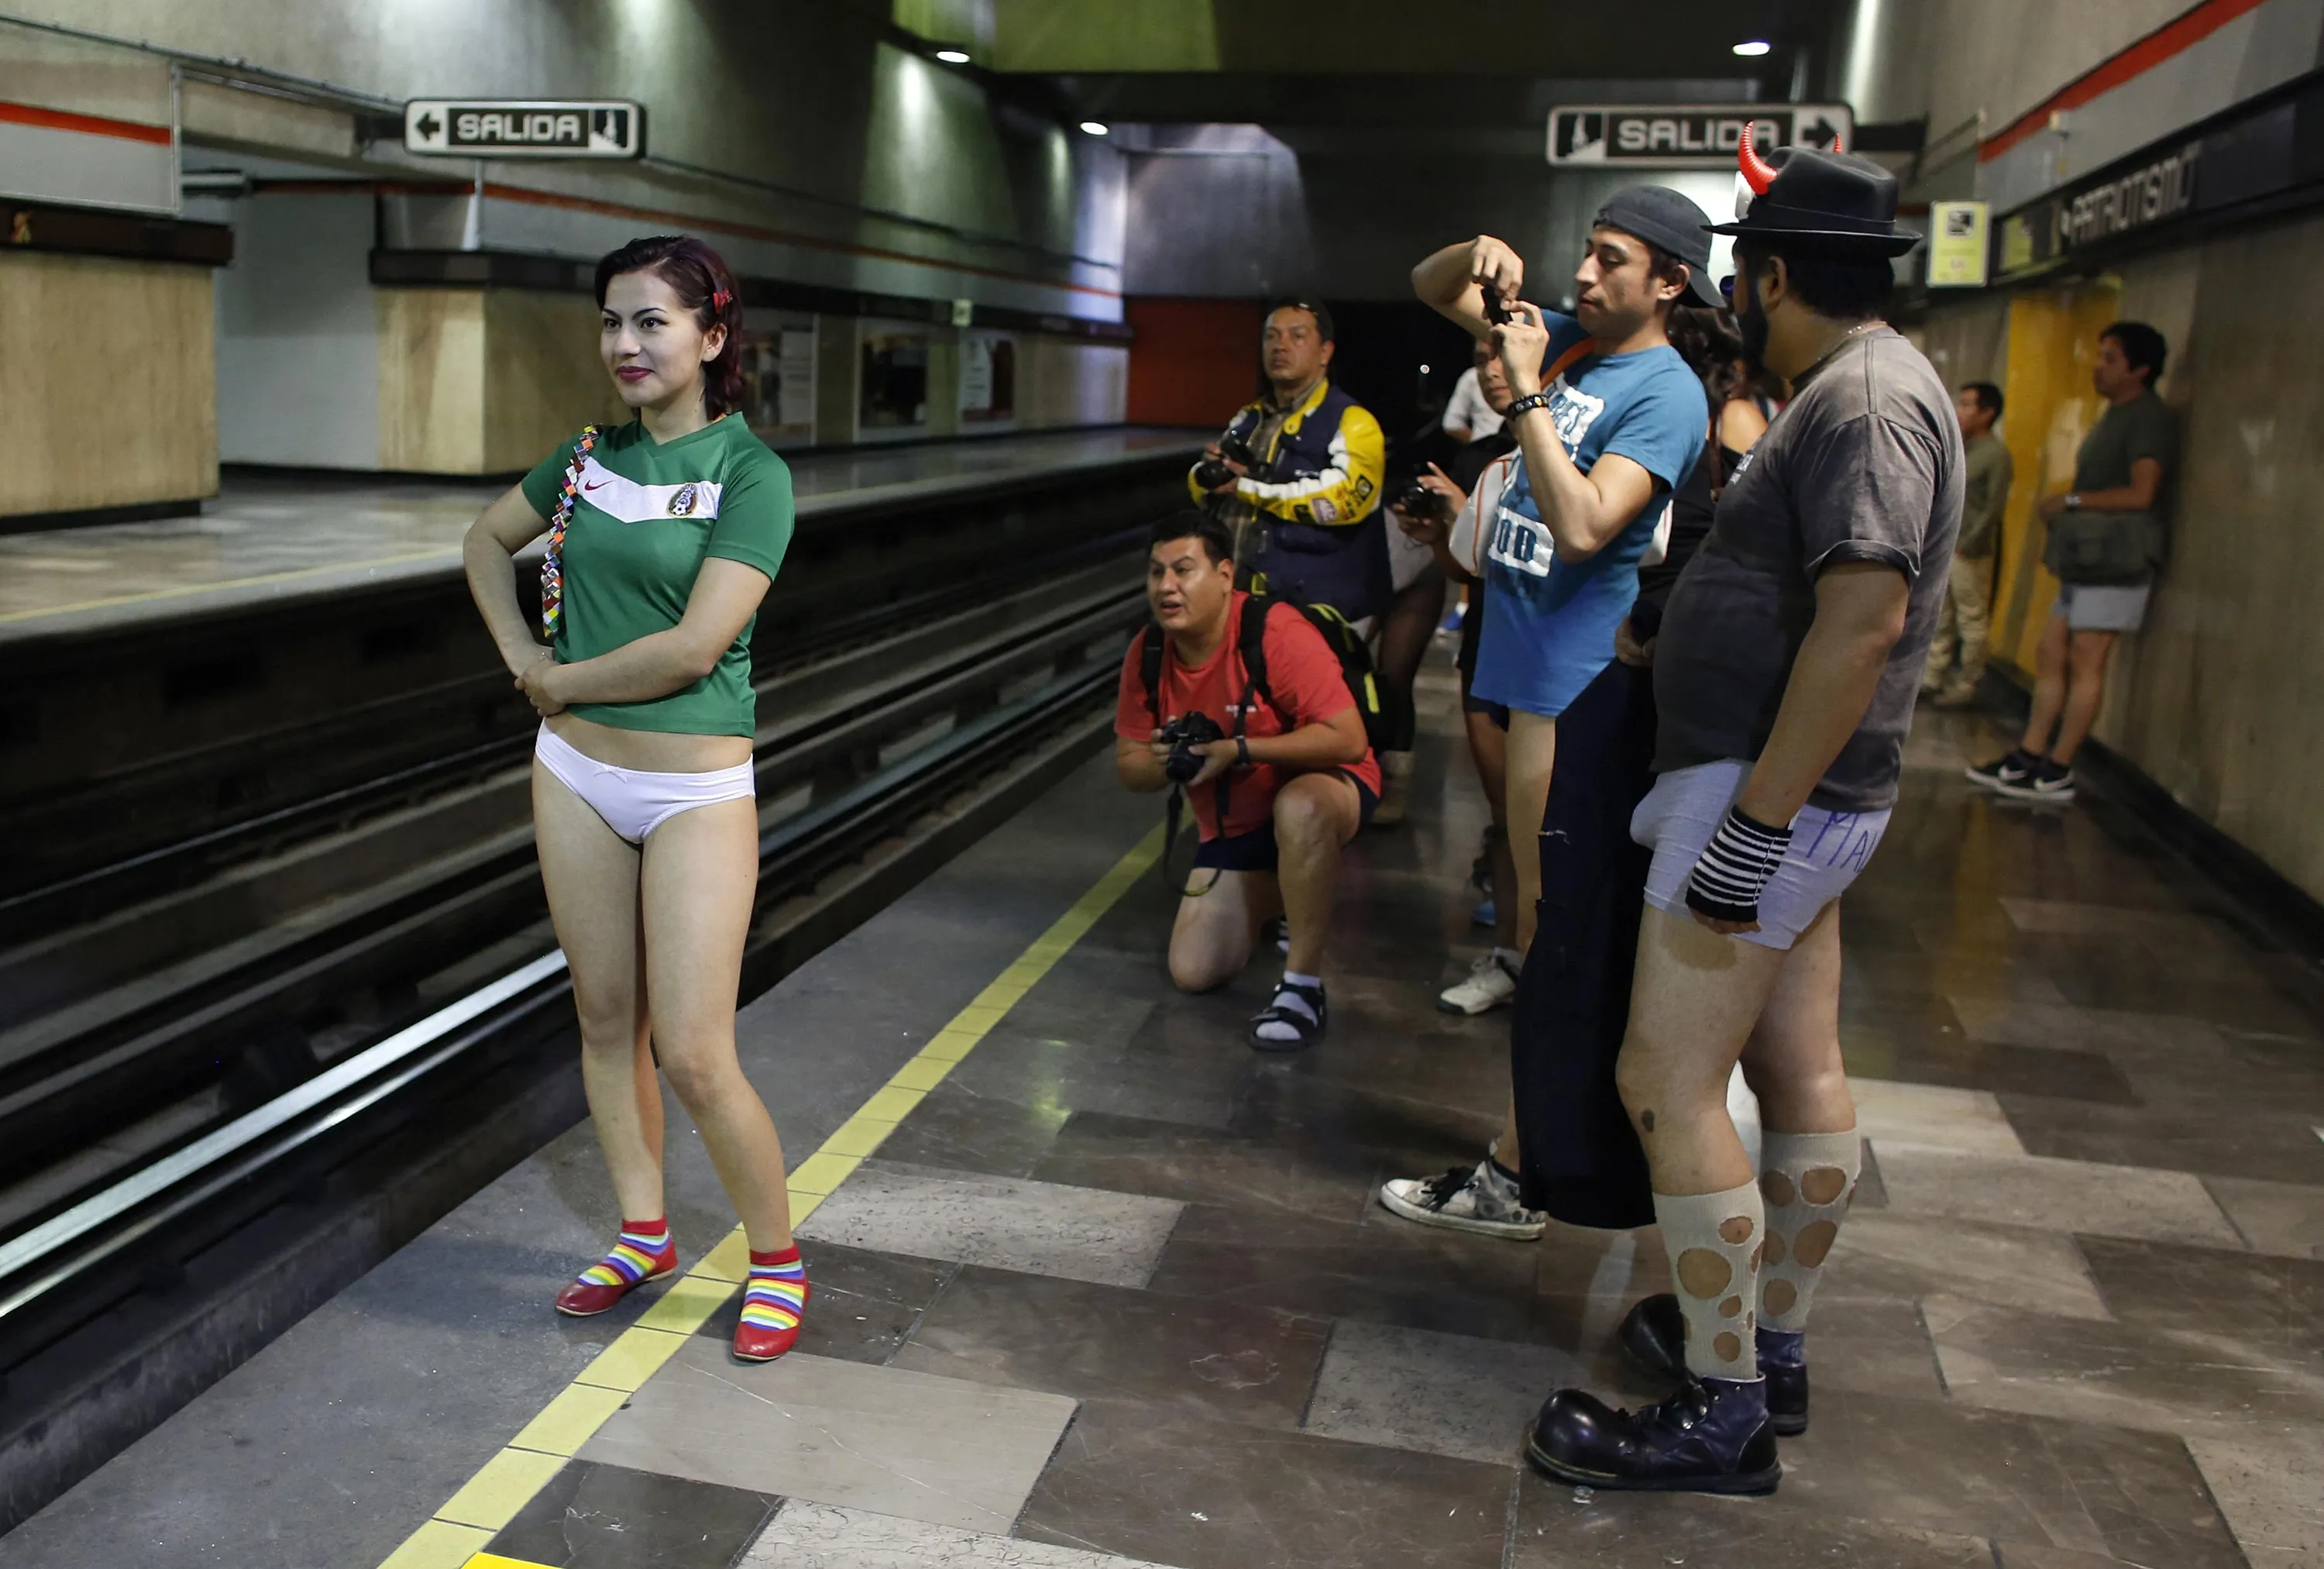 A woman without pants is photographed by members of her team at an undergro...